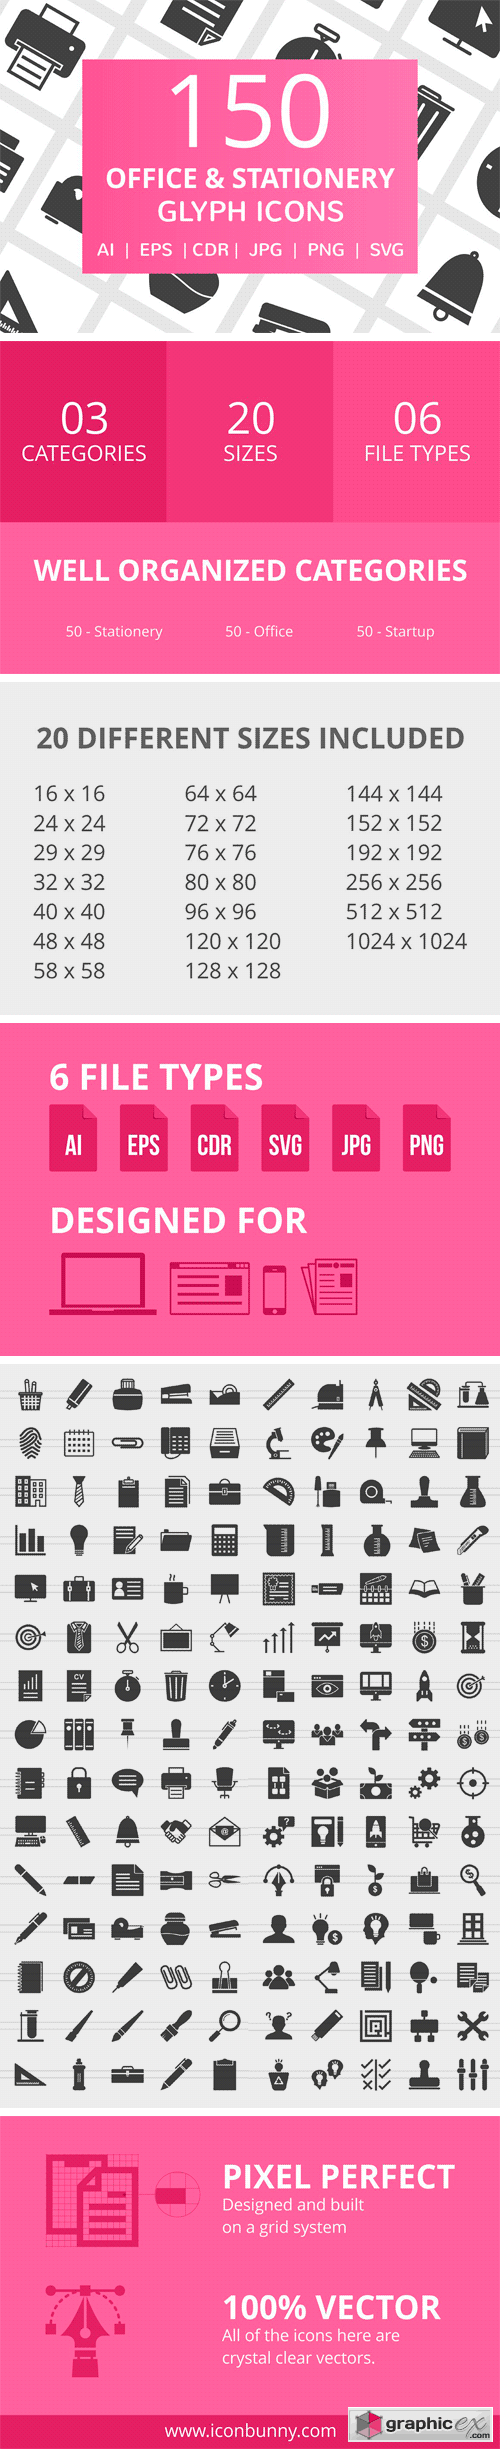 150 Office & Stationery Glyph Icons